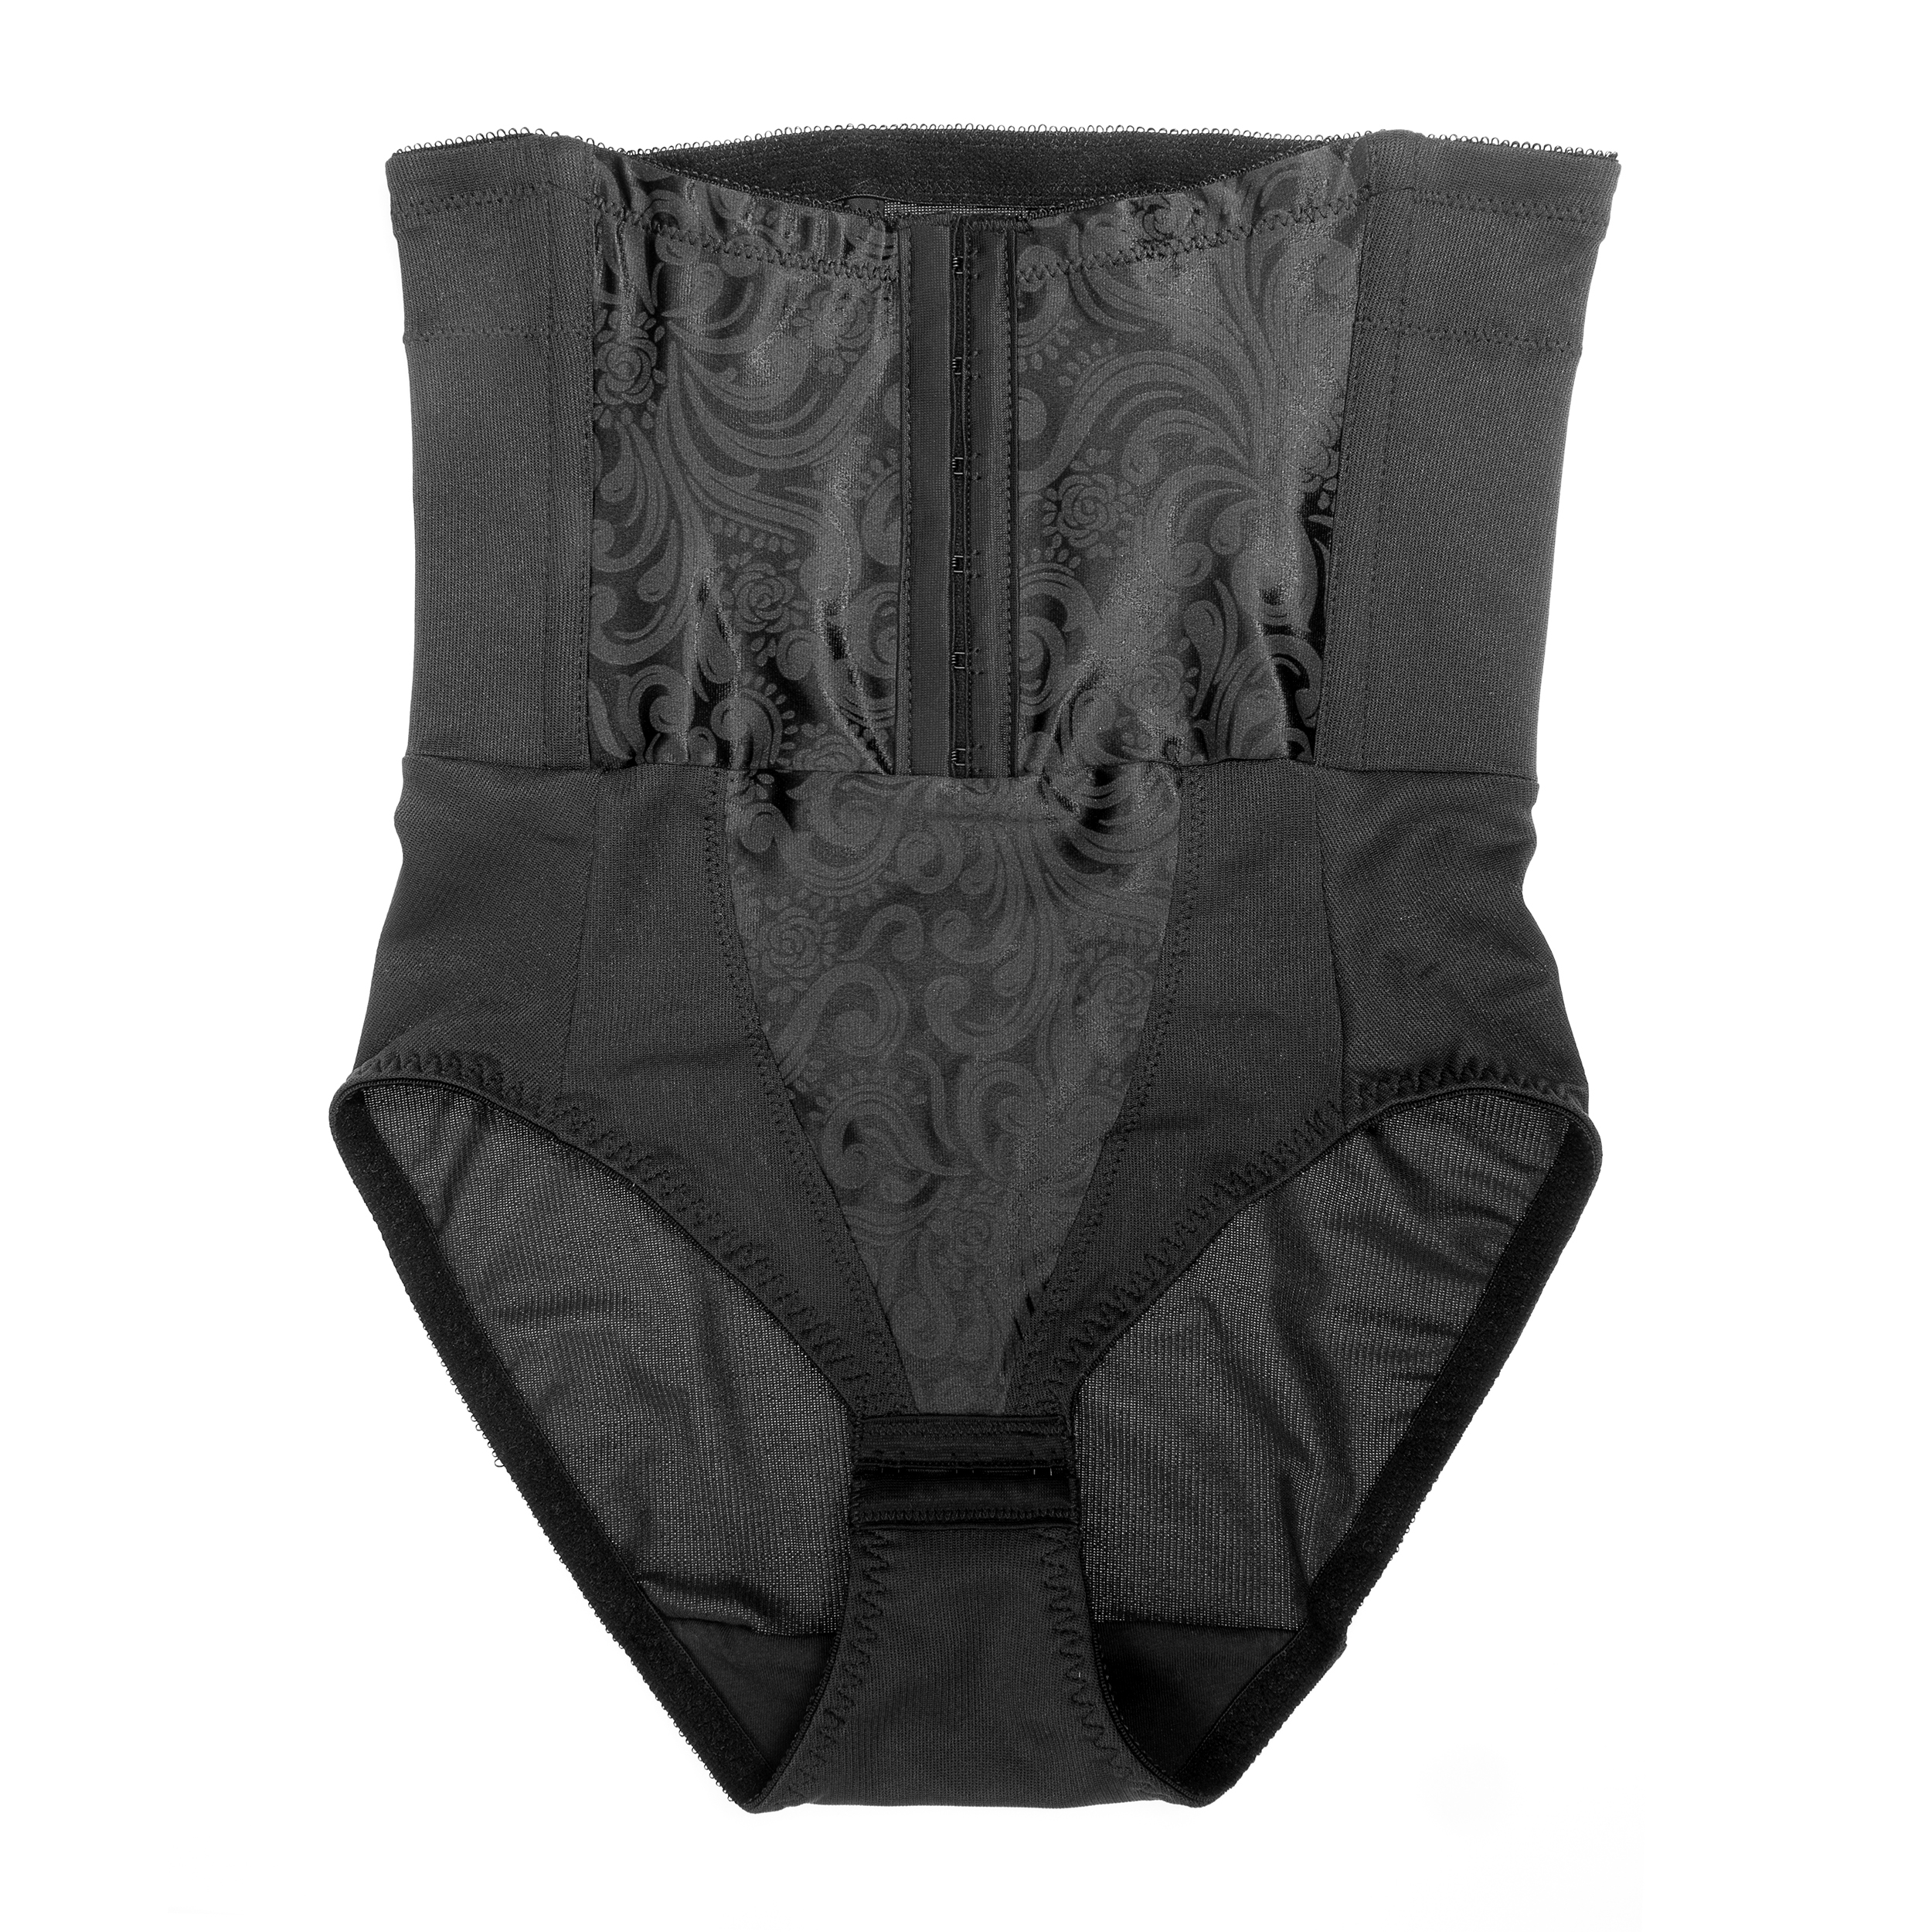 Cupid Women's Extra Firm Control Waist Cinching Shapewear Brief with Satin Deluster Panels - image 3 of 3